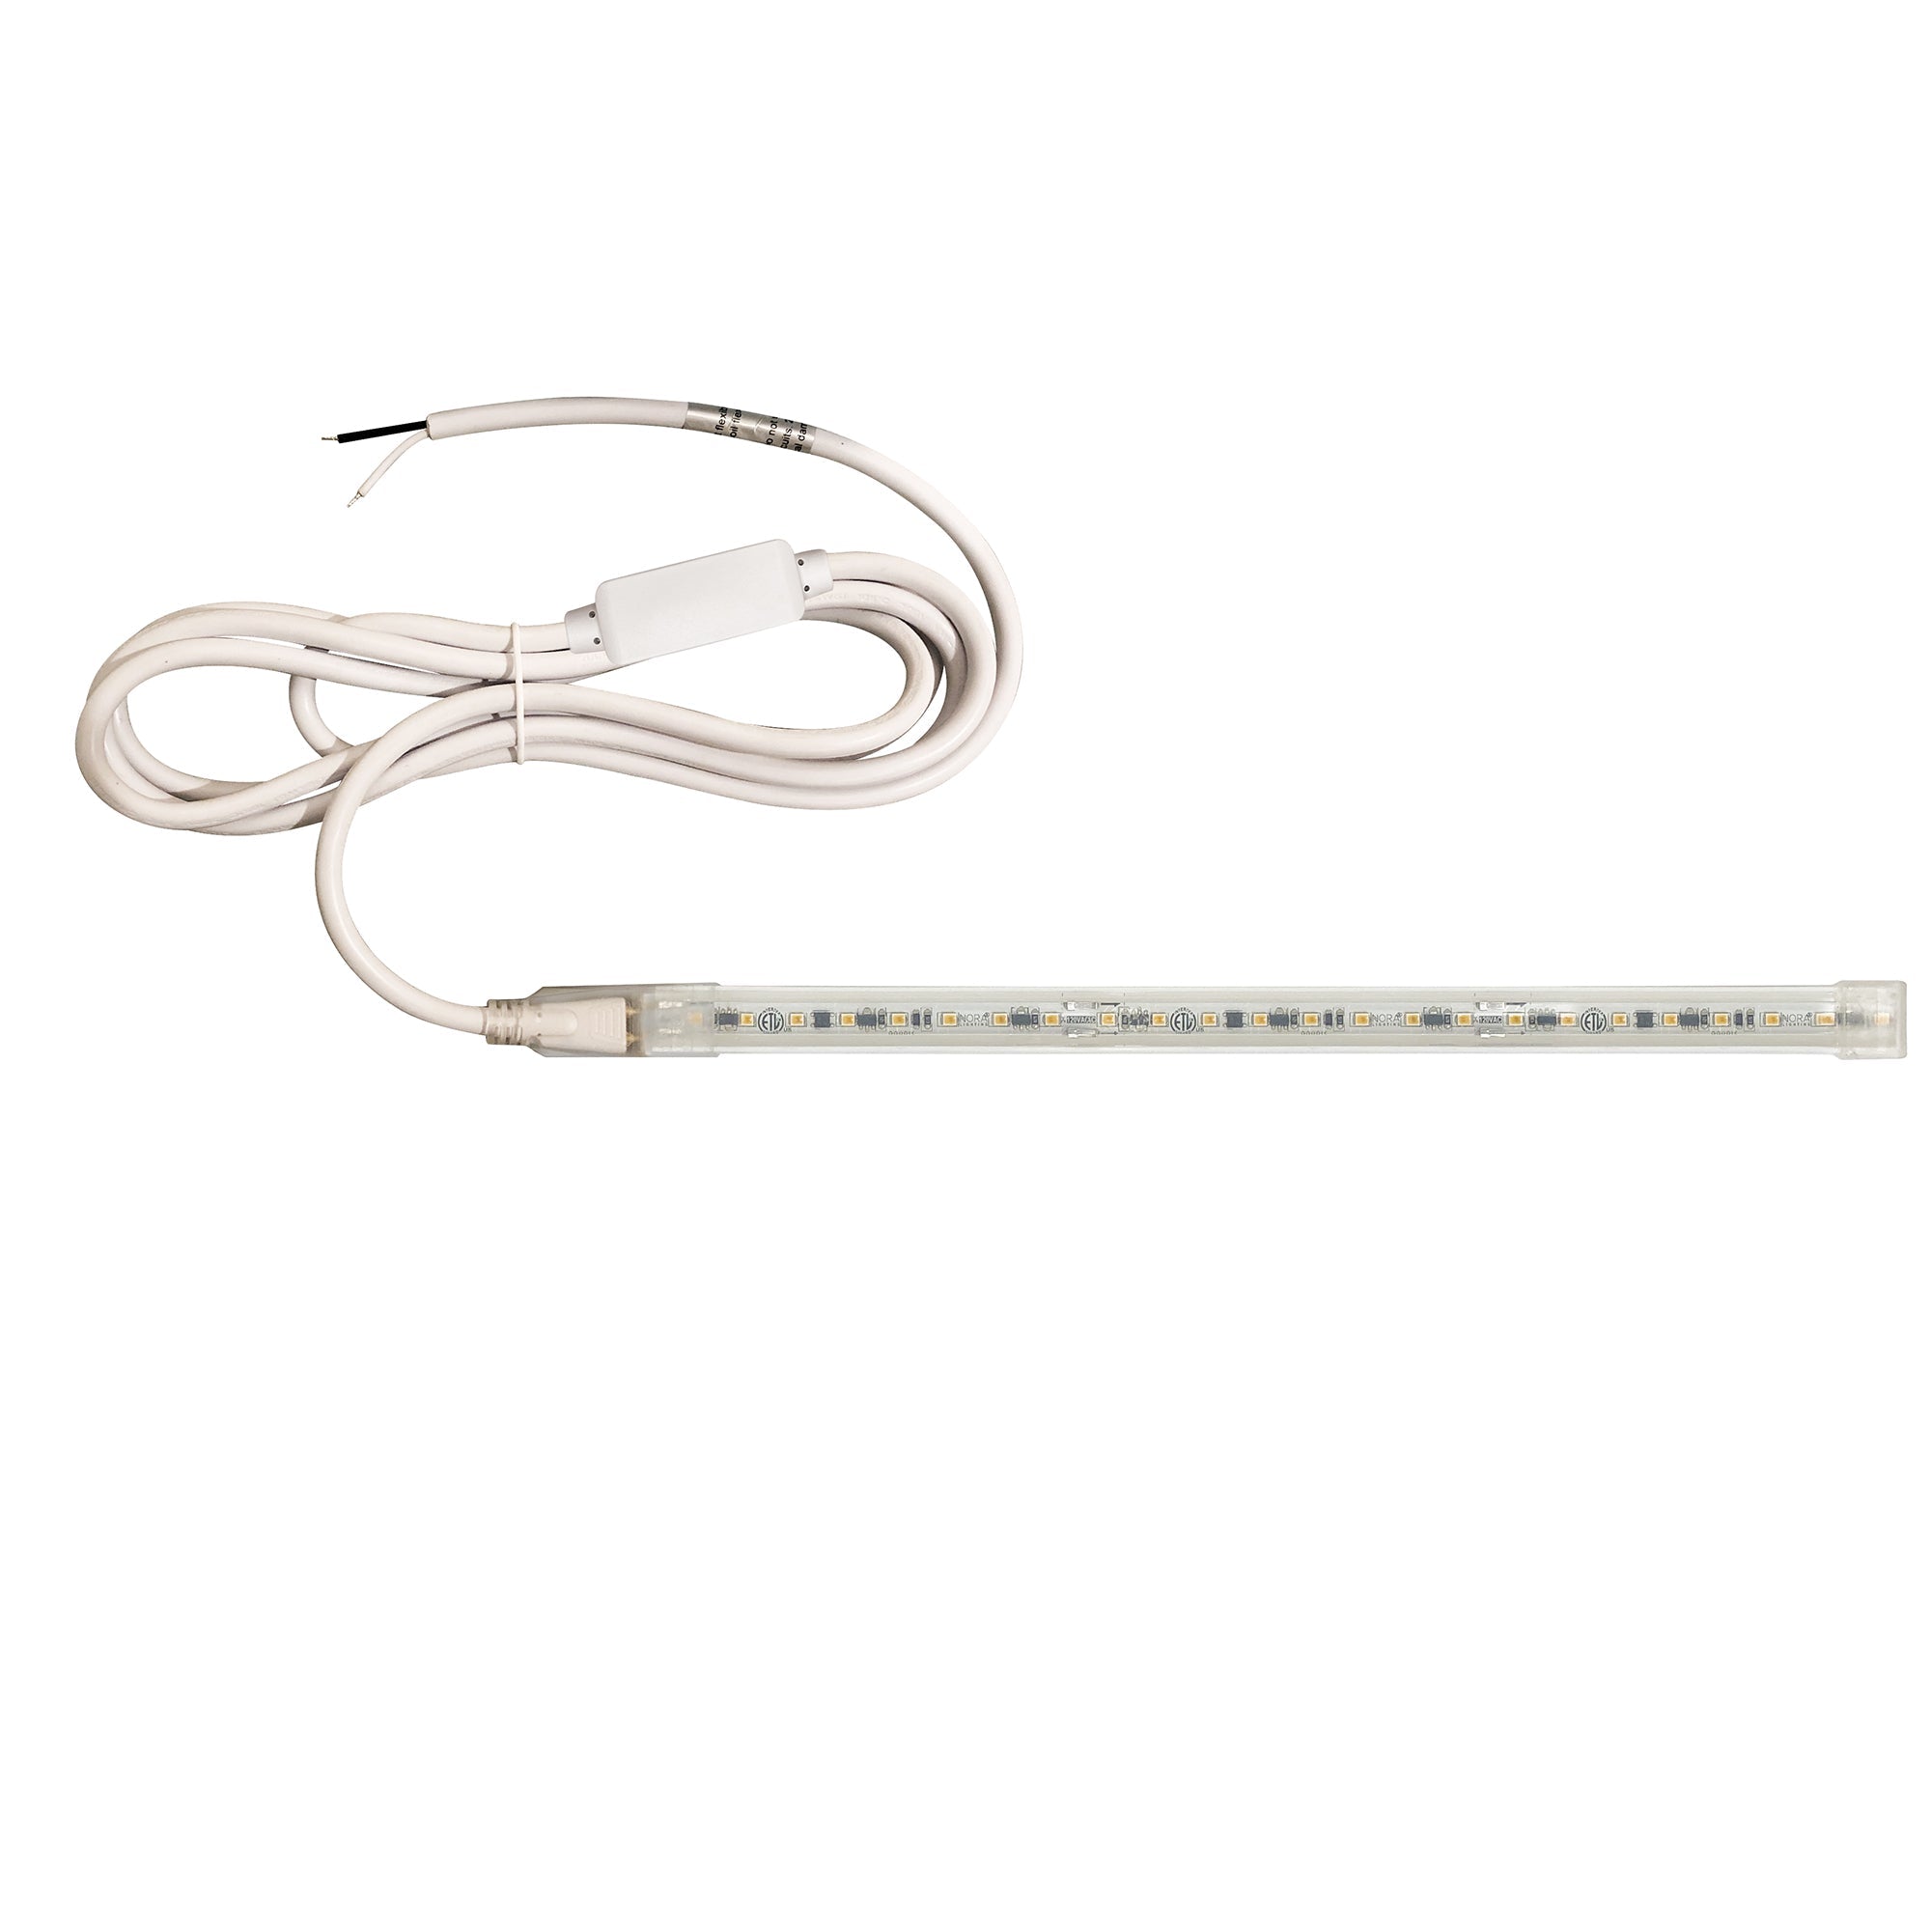 Nora Lighting NUTP13-W83-4-12-930/HWSP - Accent / Undercabinet - Custom Cut 83-ft, 4-in 120V Continuous LED Tape Light, 330lm / 3.6W per foot, 3000K, w/ Mounting Clips and 8' Hardwired Power Cord w/ Surge Protector